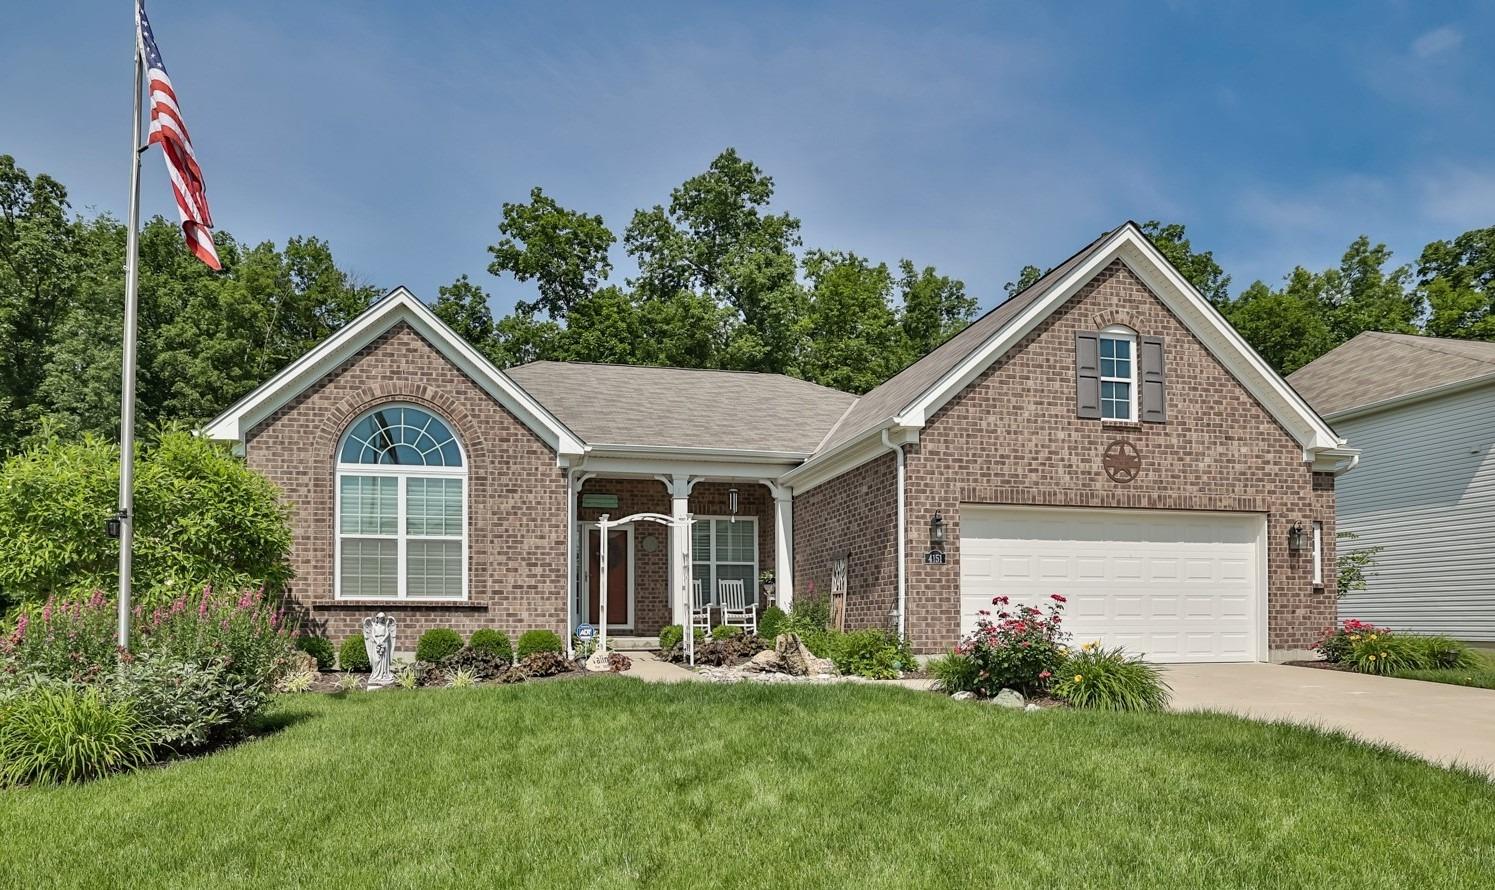 4151 Greenfield Court SIBCY CLINE REALTORS®